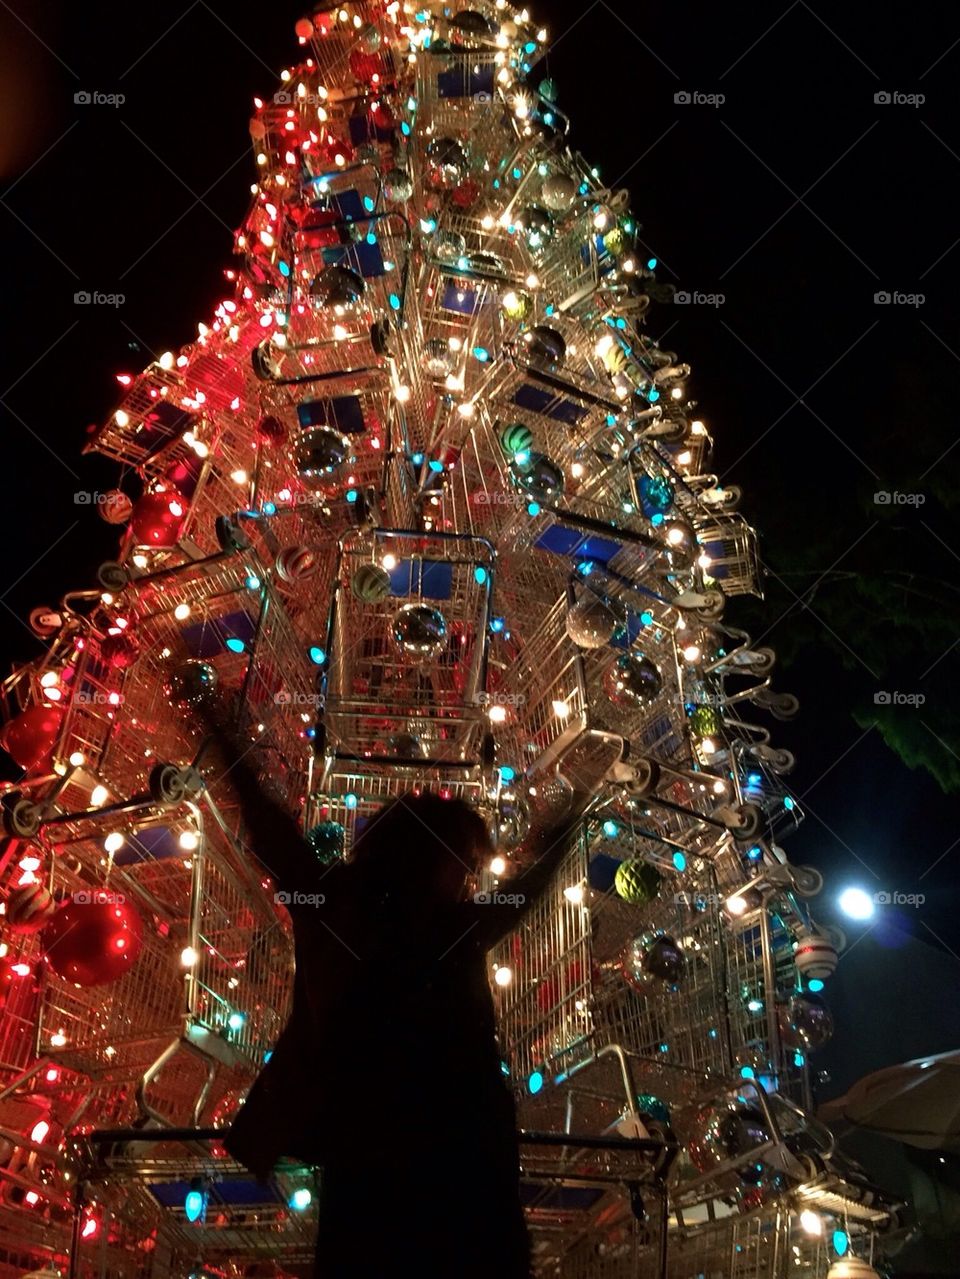 Dancing in front of the shopping cart Christmas tree 